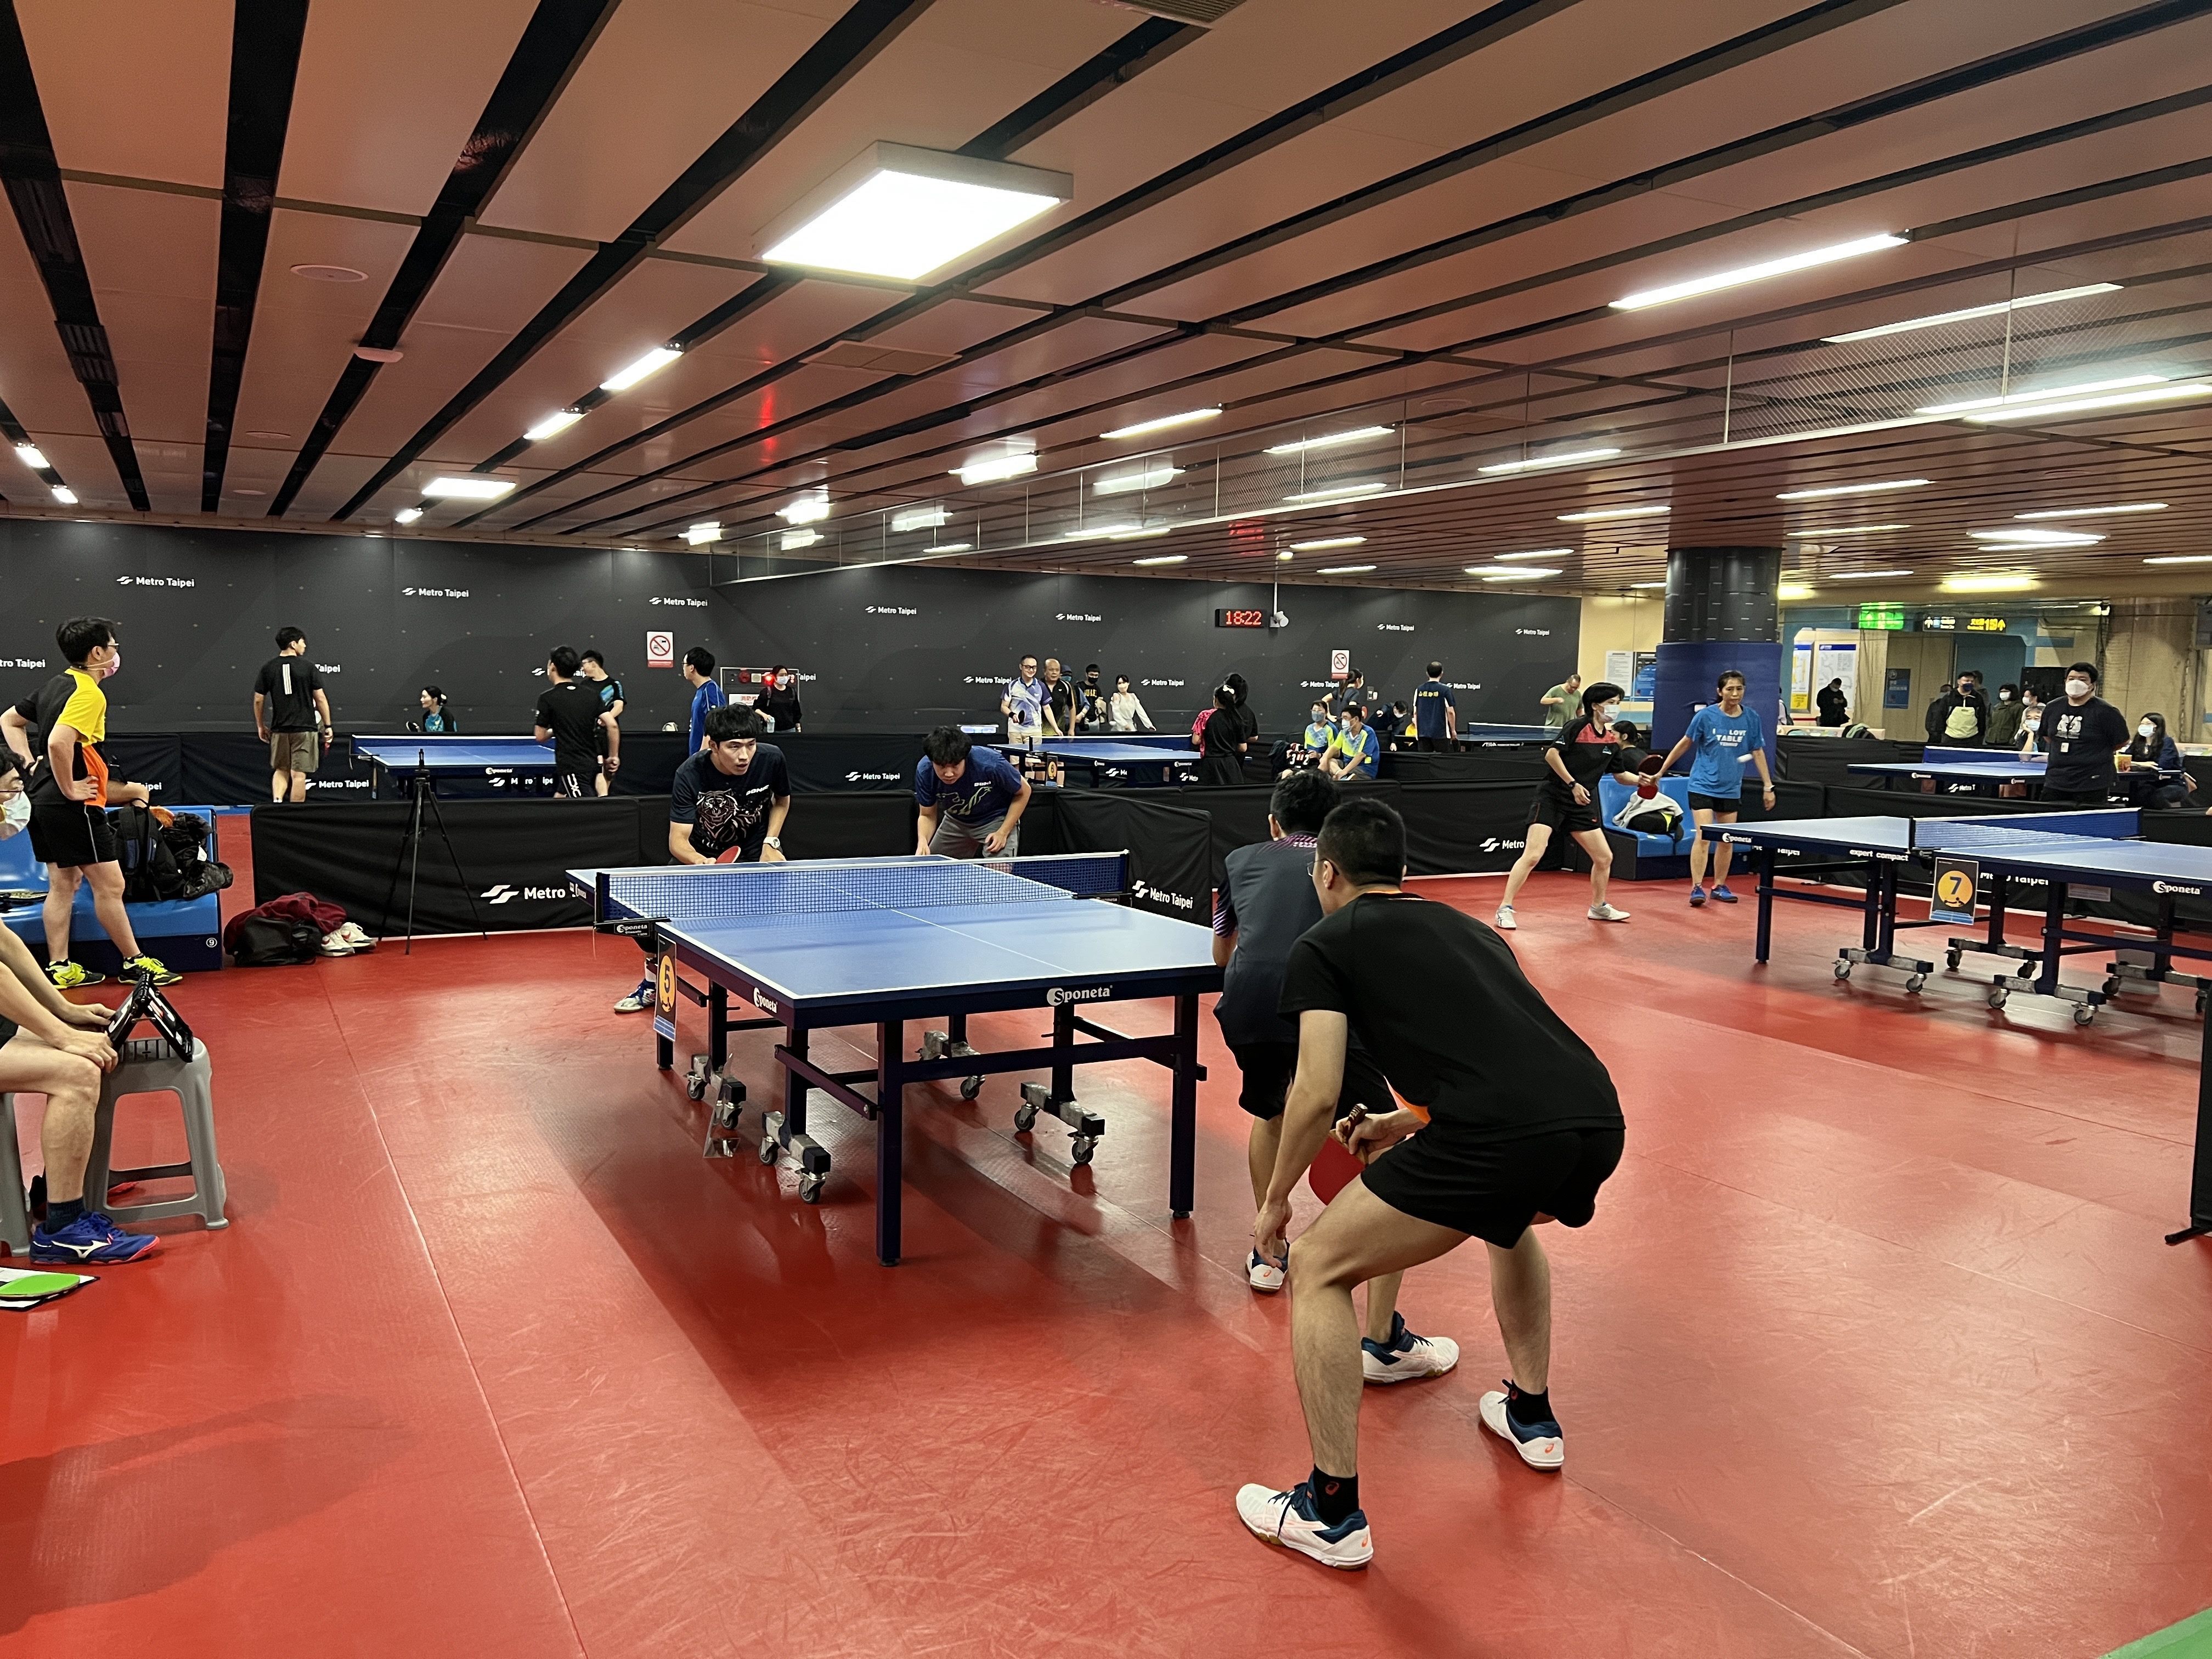 The table tennis court inside the complex housing the MRT Banqiao Station